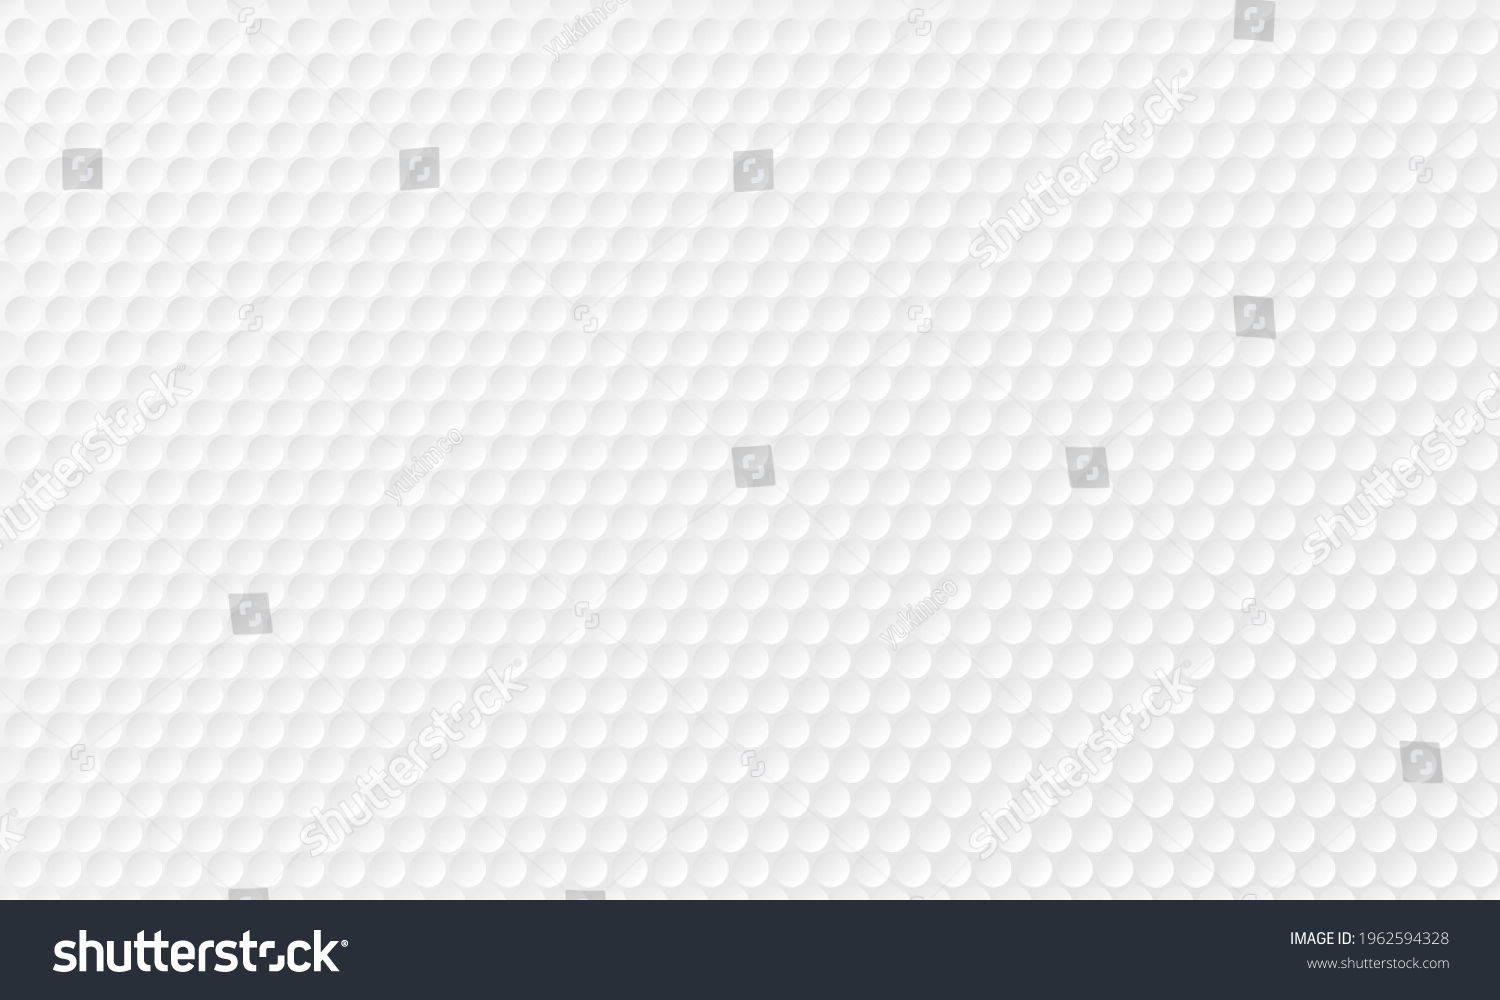 Background material illustration with a golf ball pattern. #1962594328